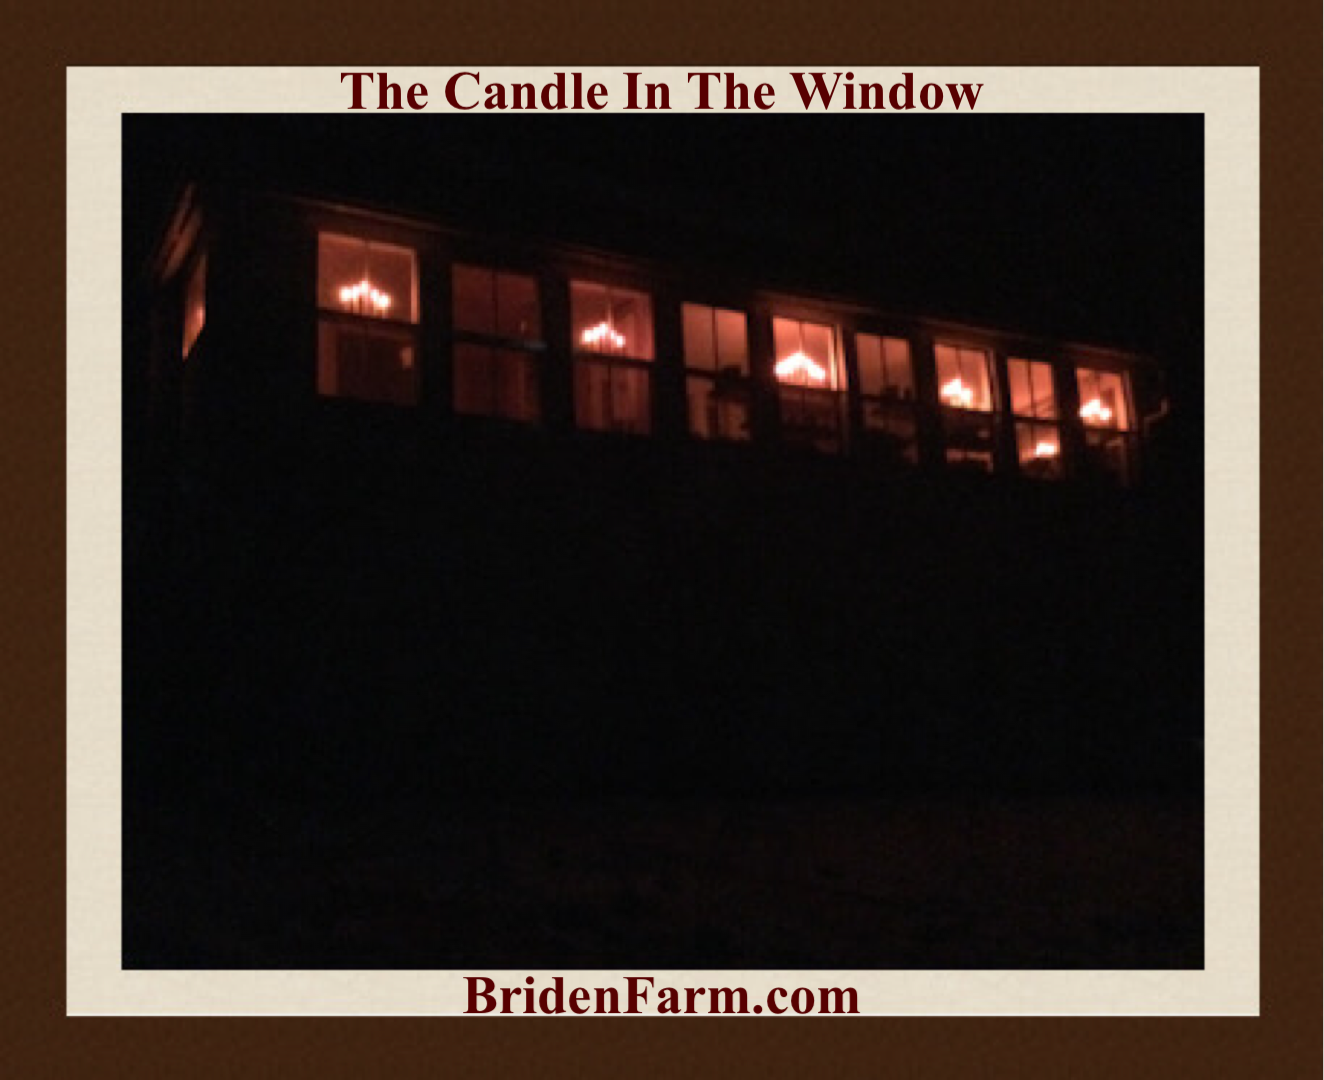 There’s a Candle in The Window